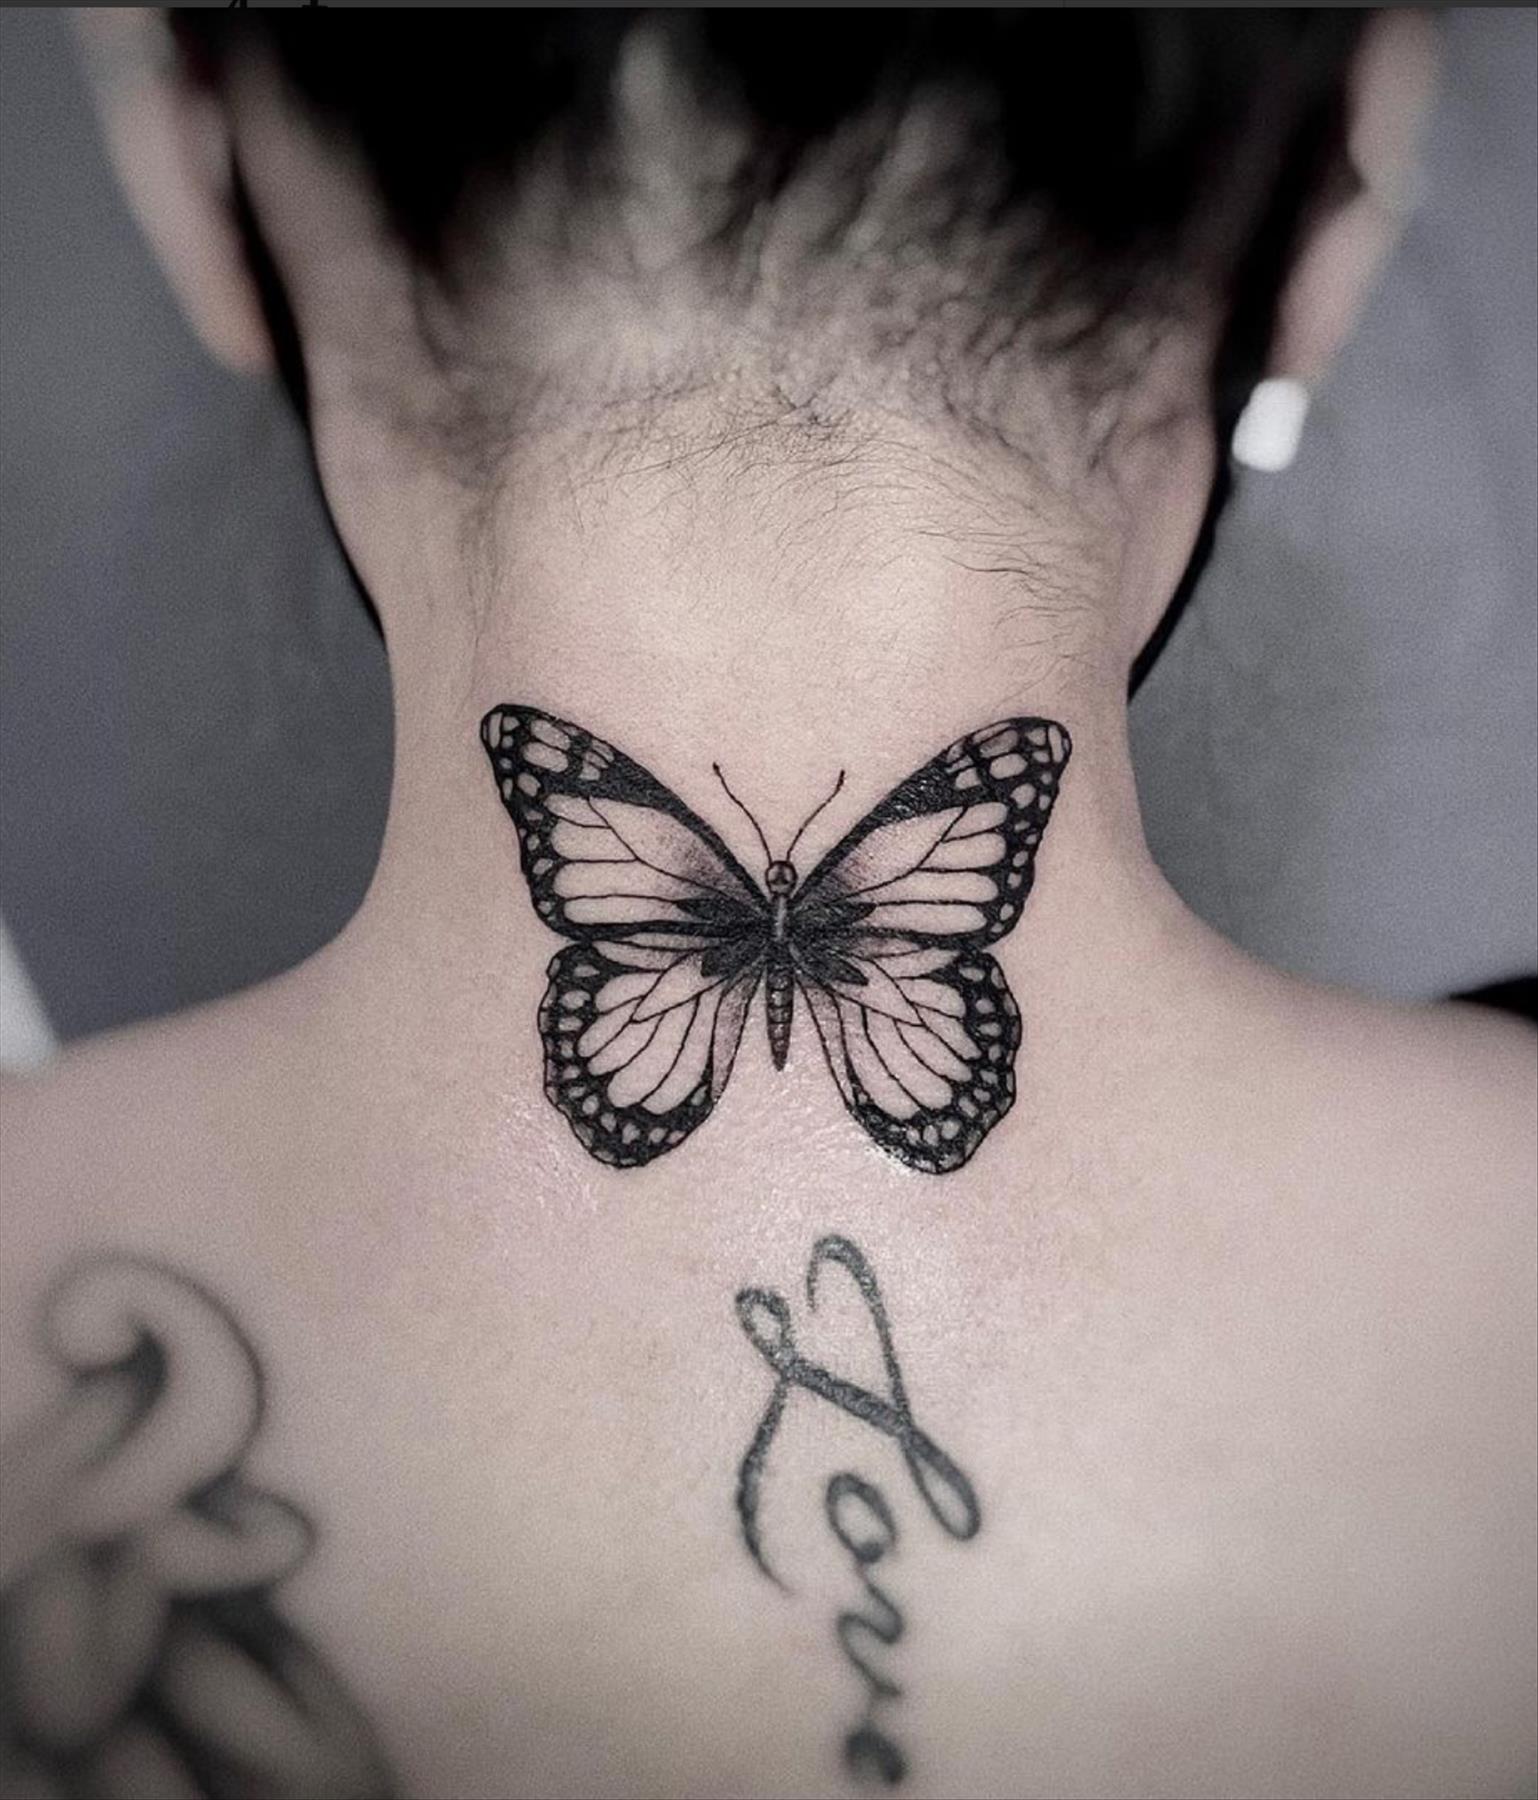  Pretty back tattoos for women inspirations 